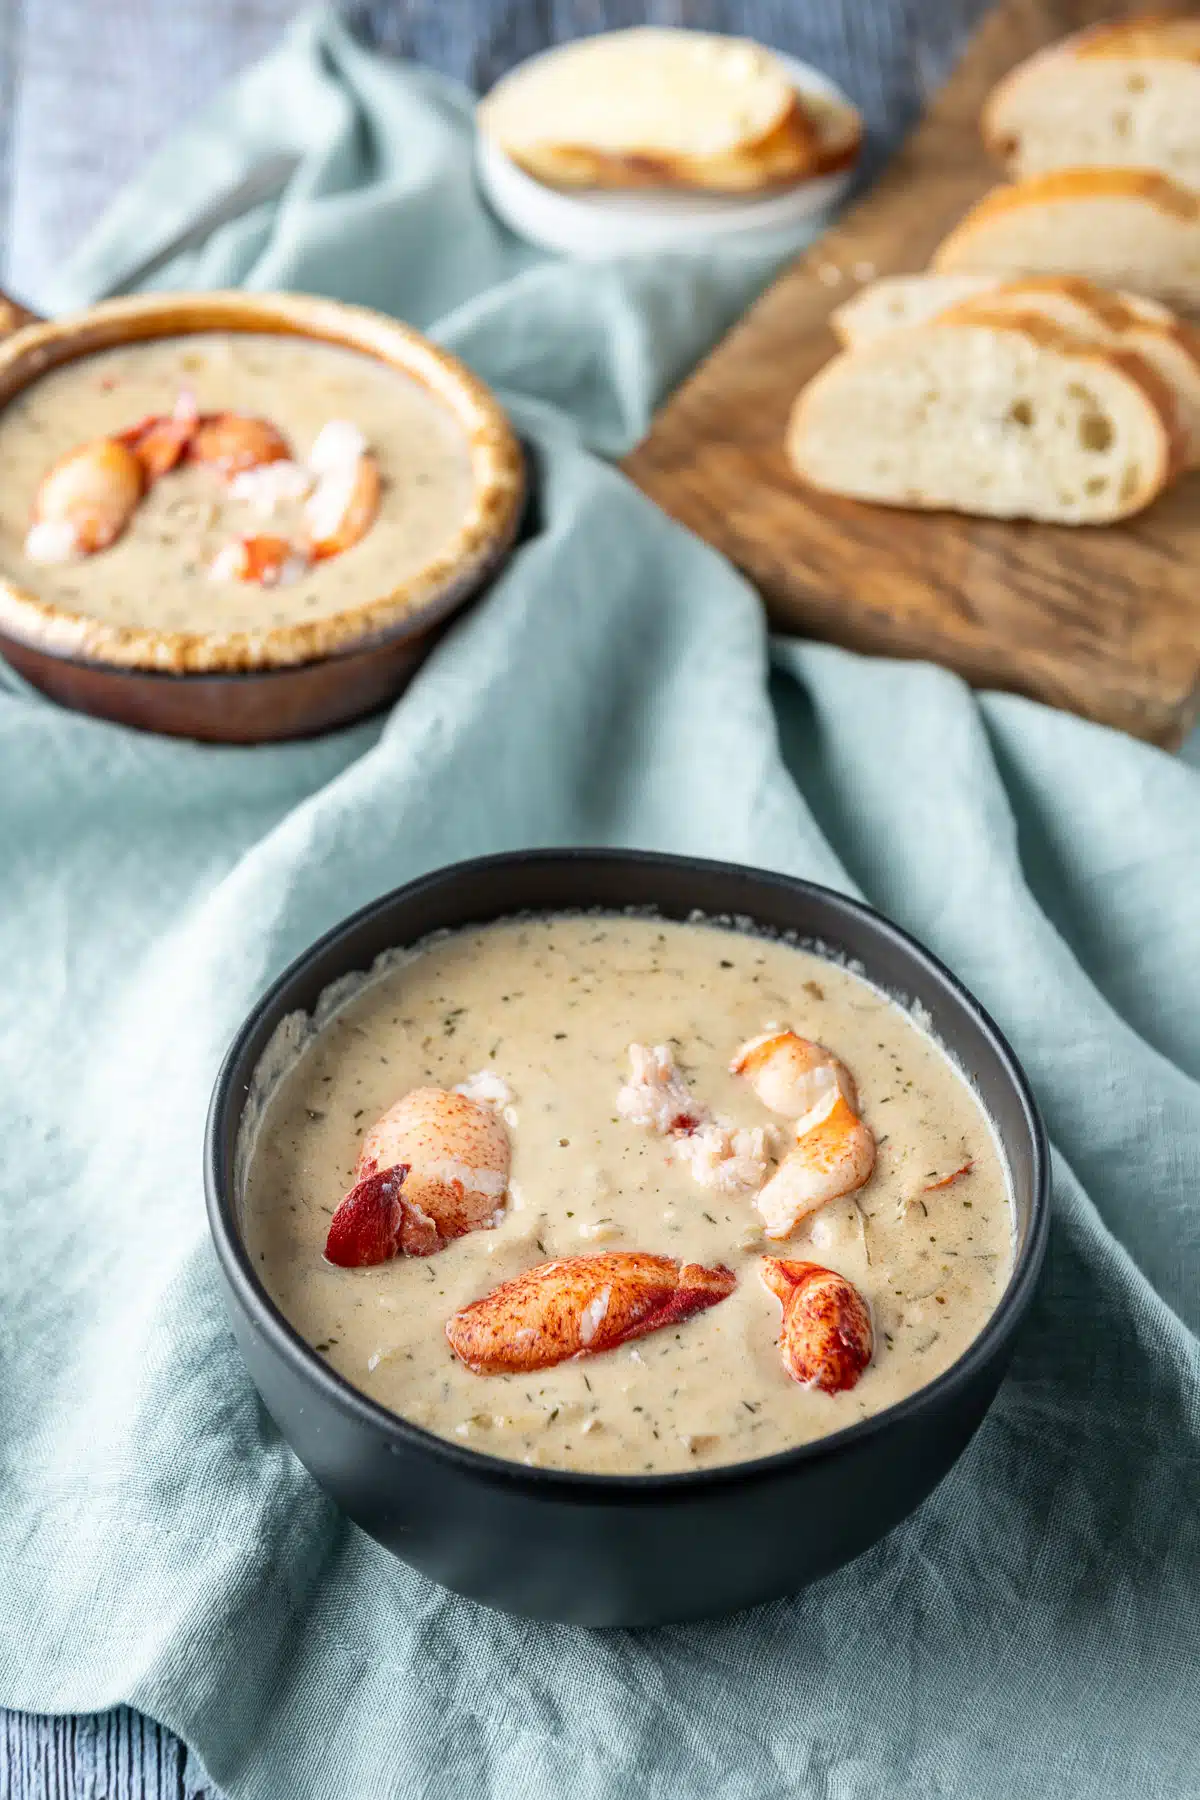 A big black bowl and a smaller crock filled with the bisque with lots of lobster pieces on top along with bread in the back